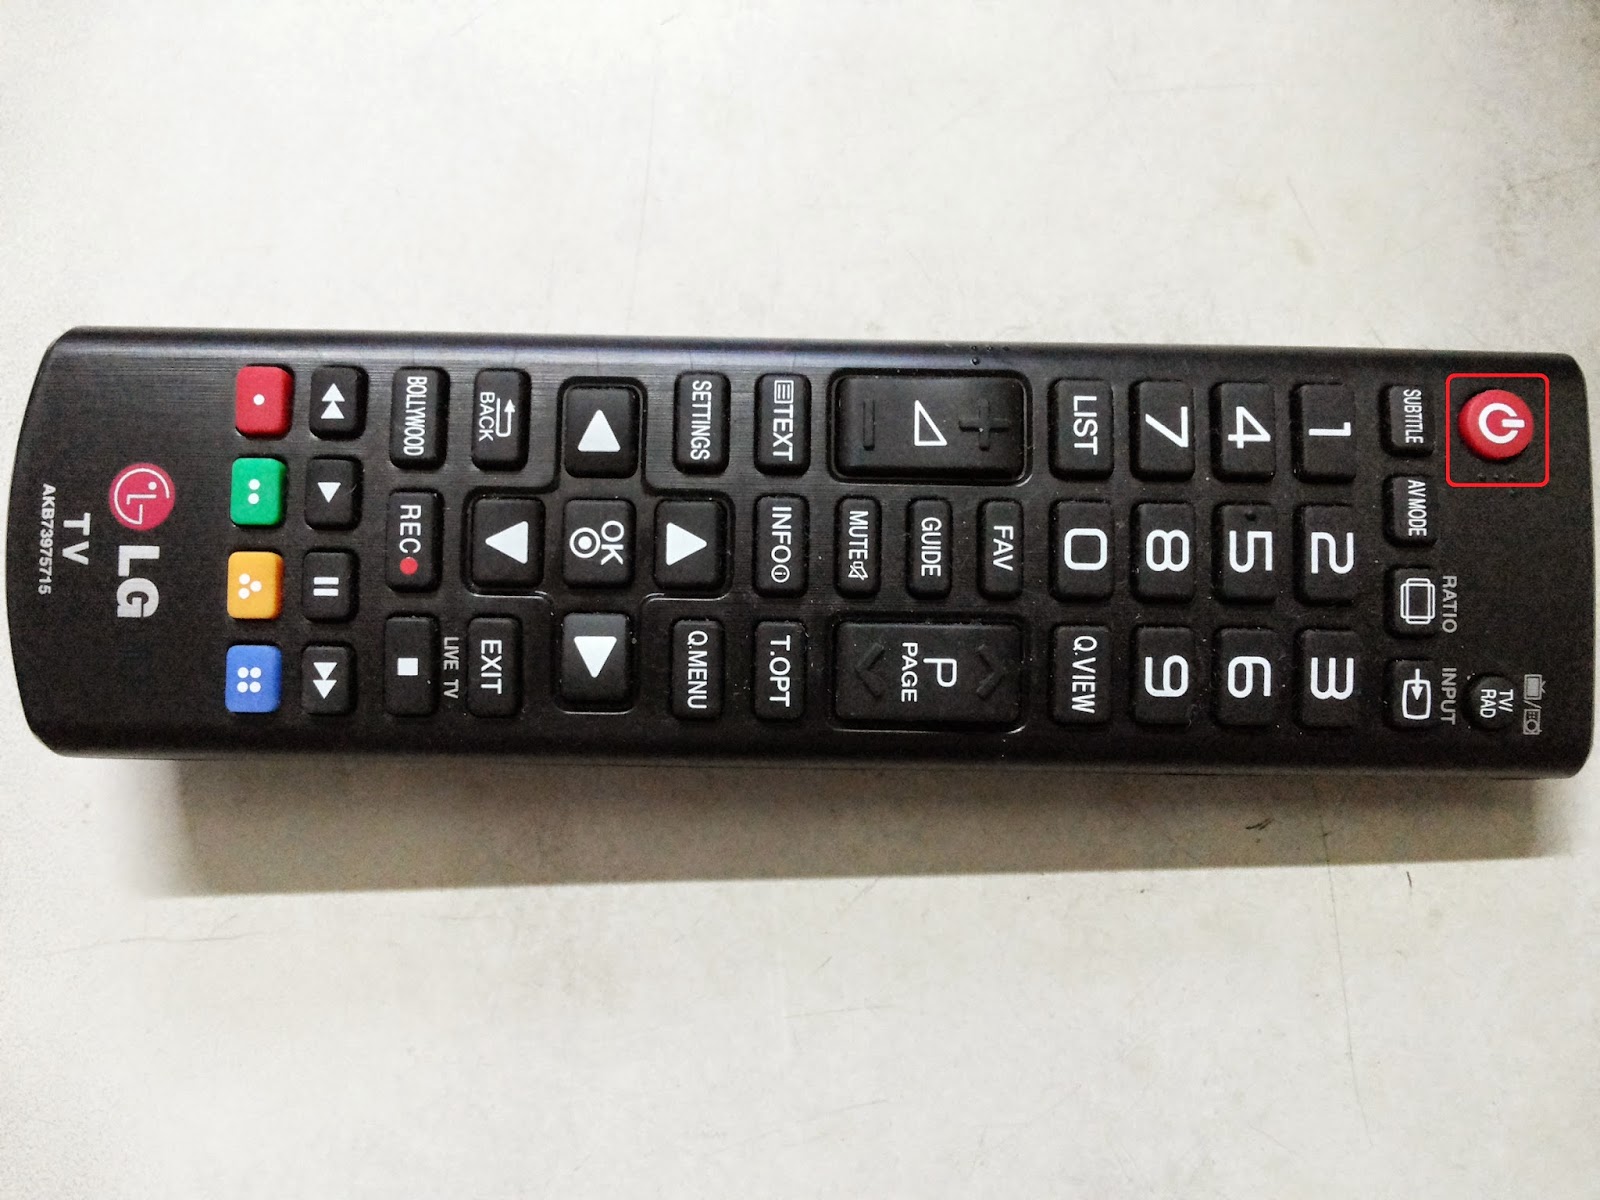 Socrates S Experience How To Program And Use Airtel Digital Tv